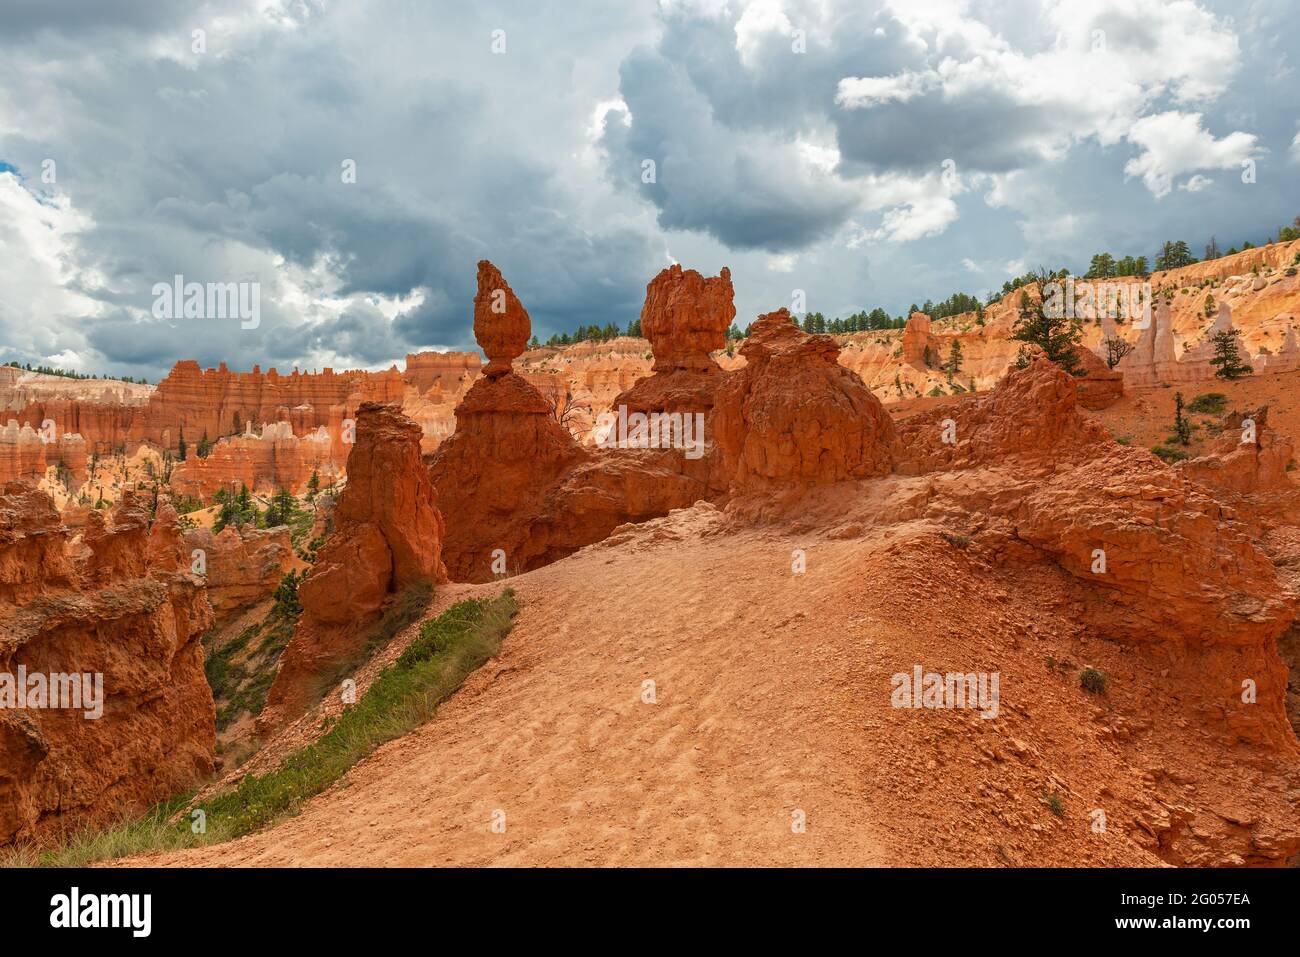 Dramatic thunder clouds above the sandstone hoodoos, Bryce Canyon national park, Utah, United States of America, USA. Stock Photo